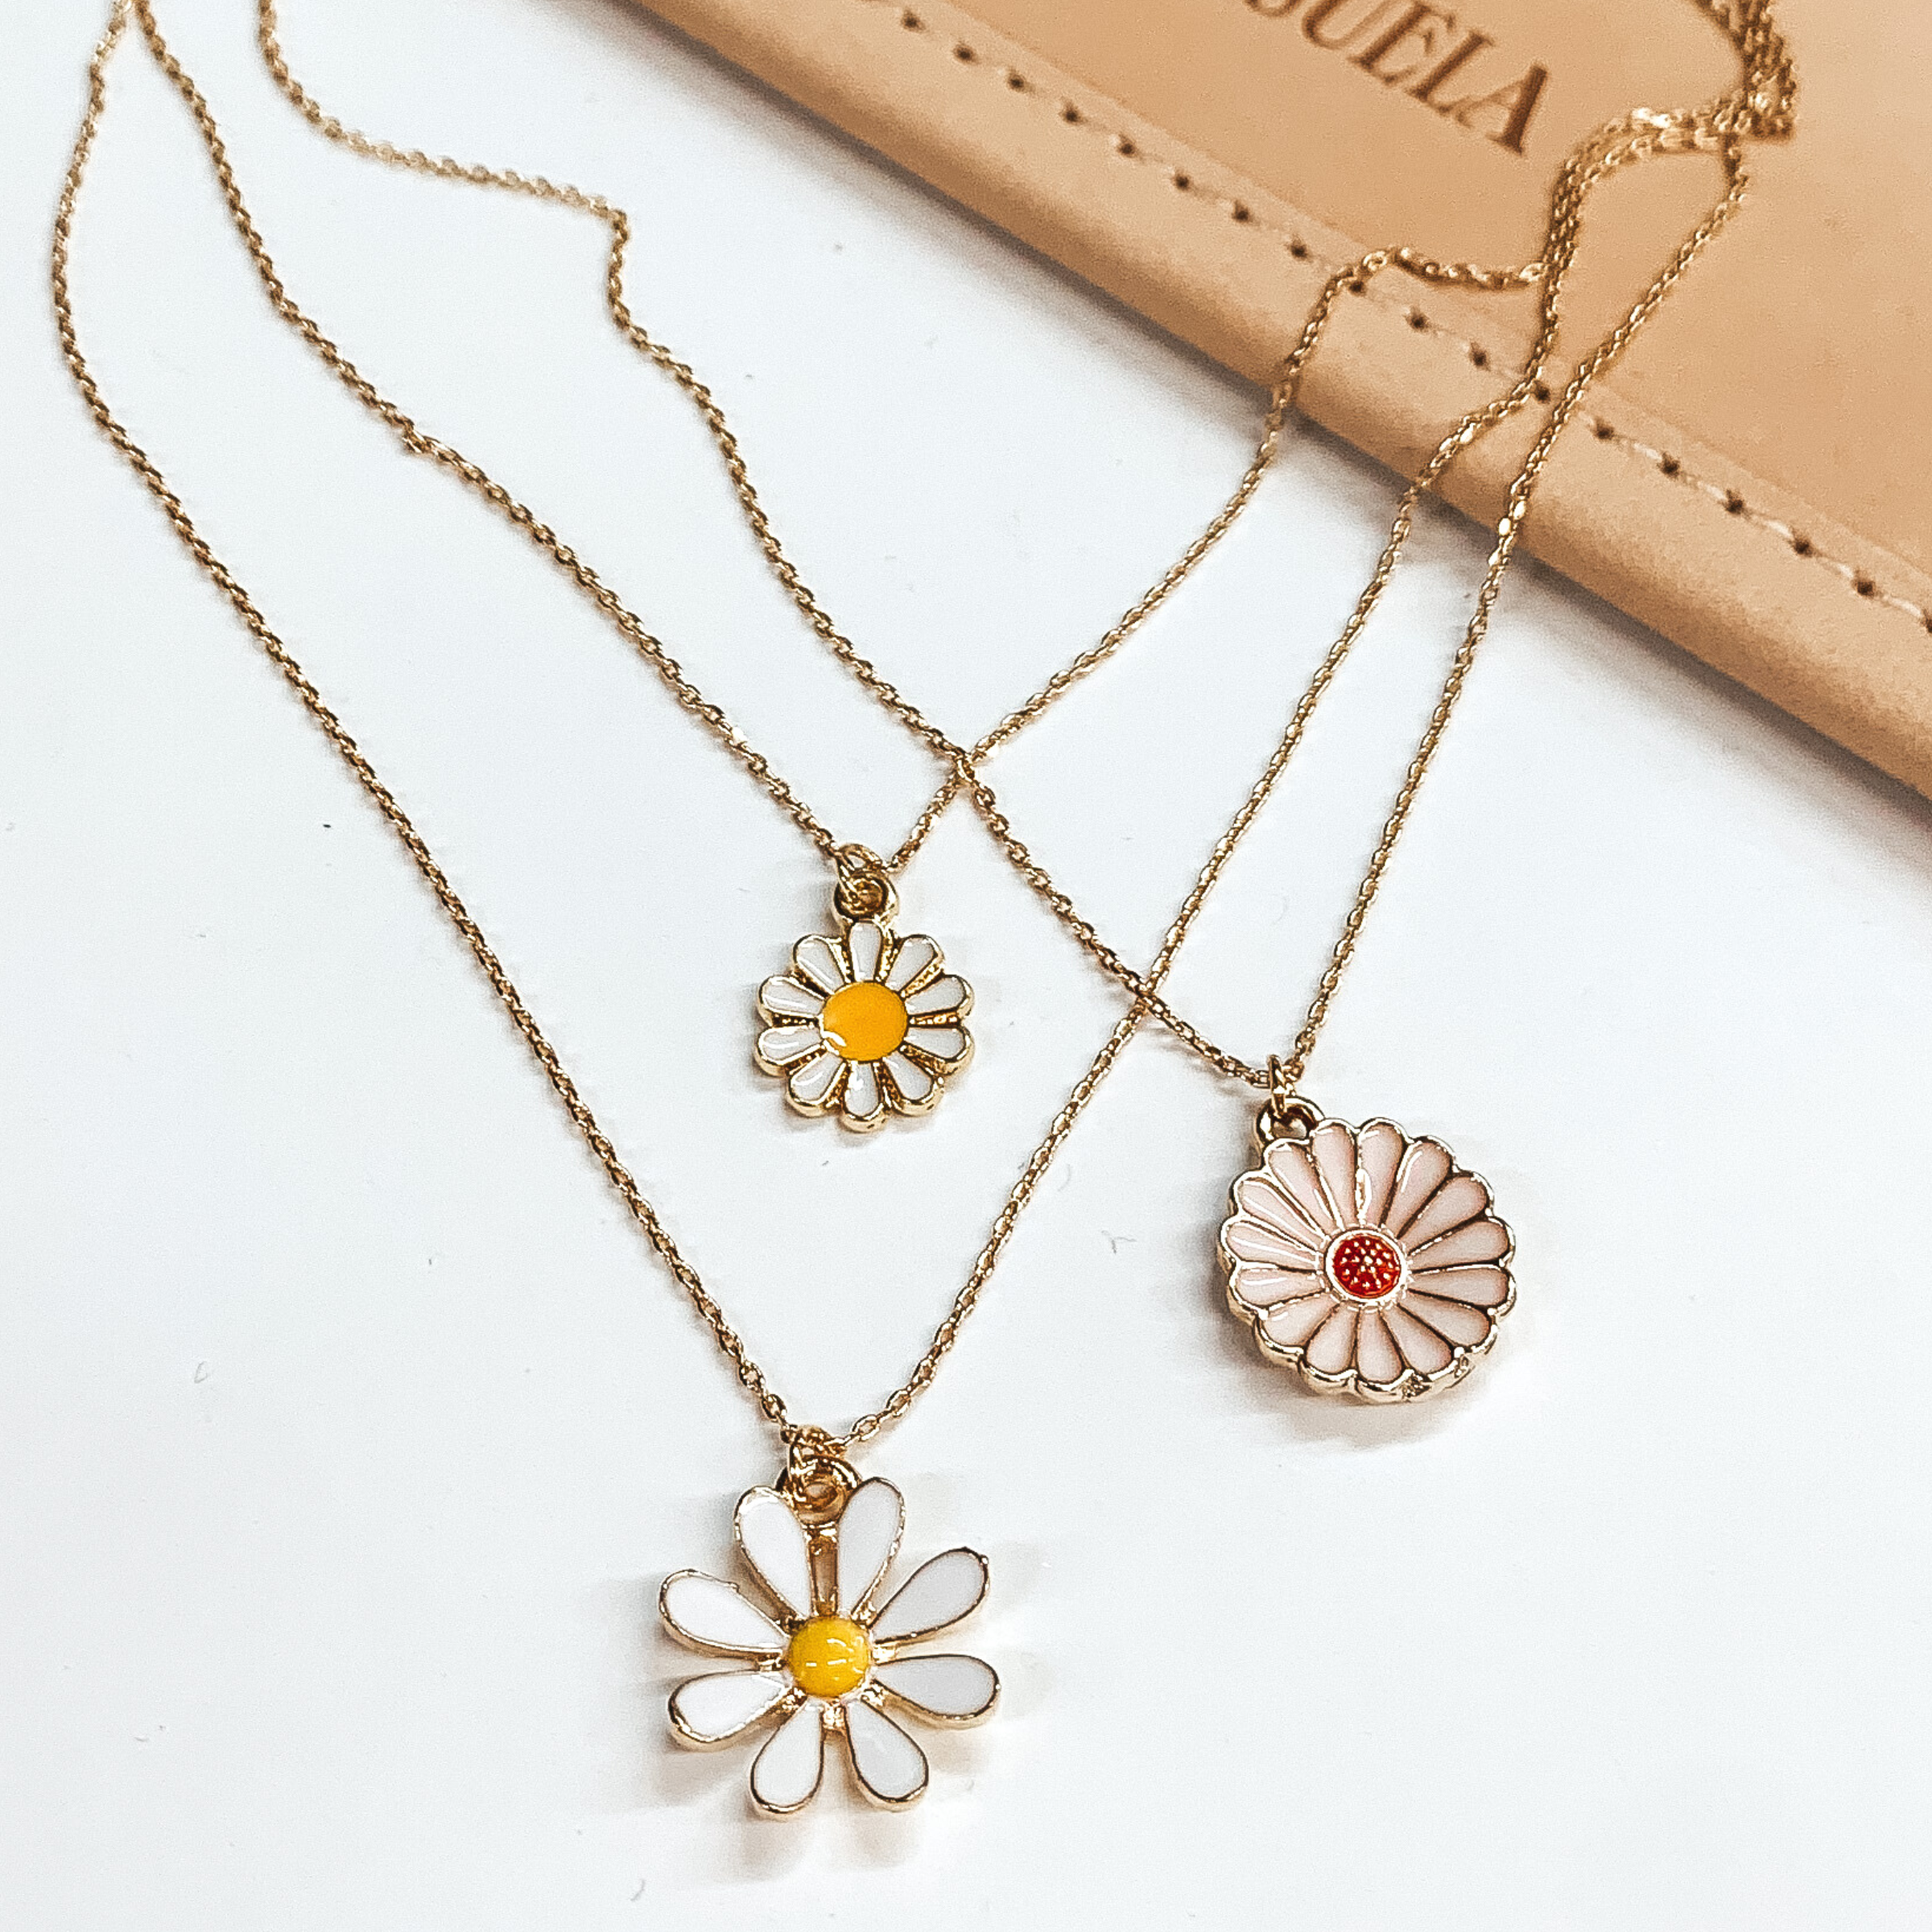 Three Strand Gold Multi Chain Necklace Set with 90's Flower Charms